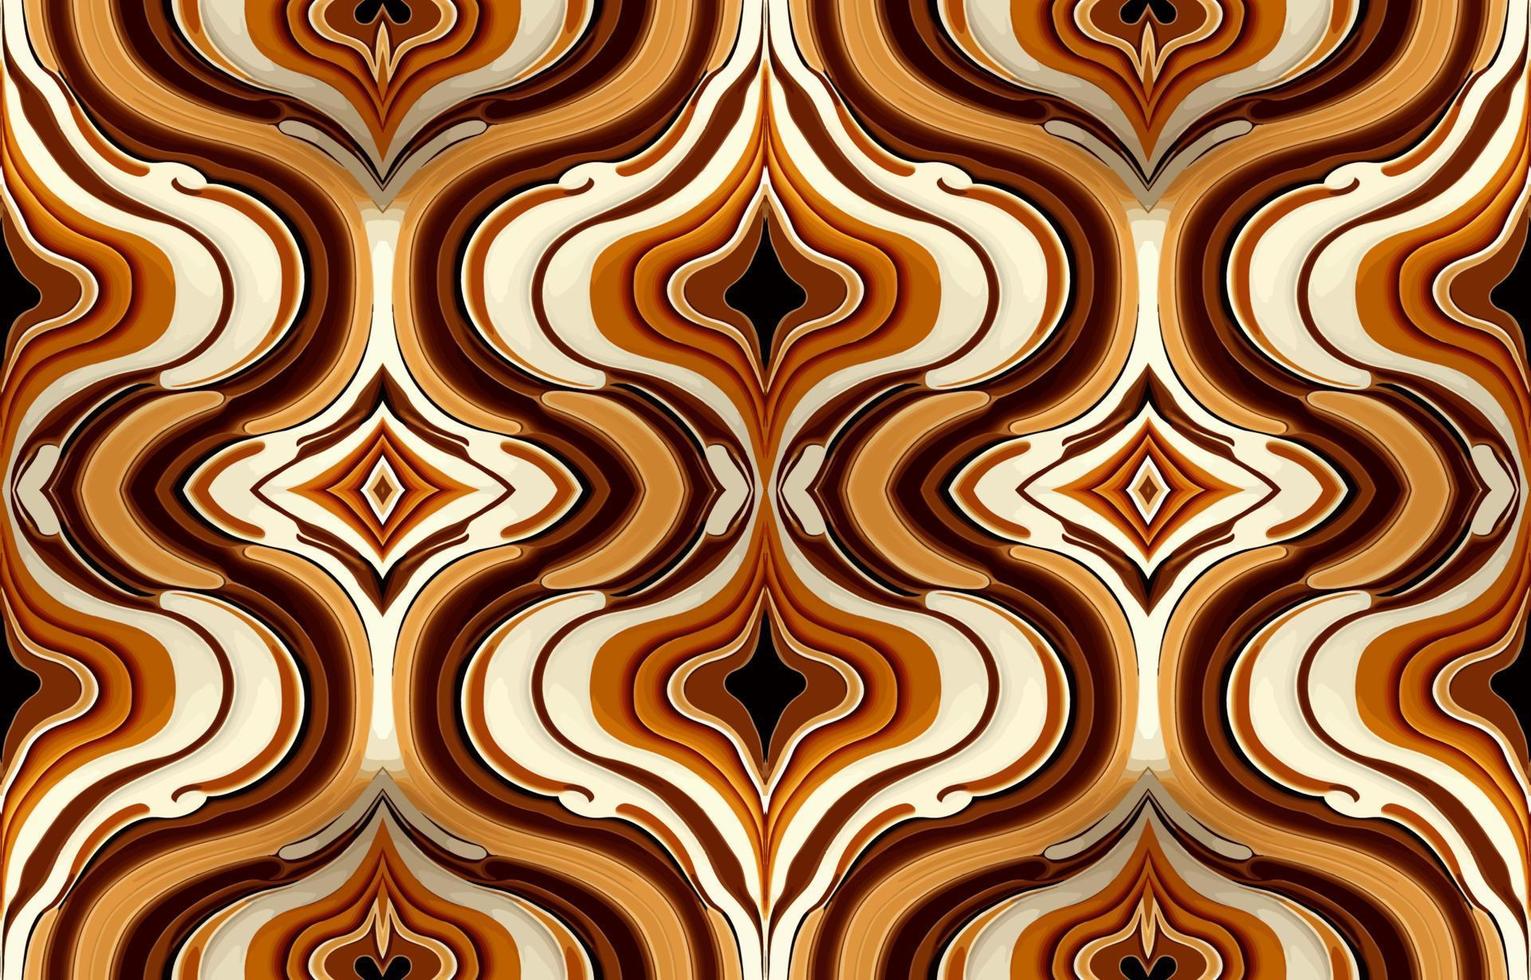 Porcelain seamless fabric pattern bright brown tone. Abstract traditional folk ikat antique porcelain graphic line. Texture textile vector illustration ornate elegant luxury vintage retro style.